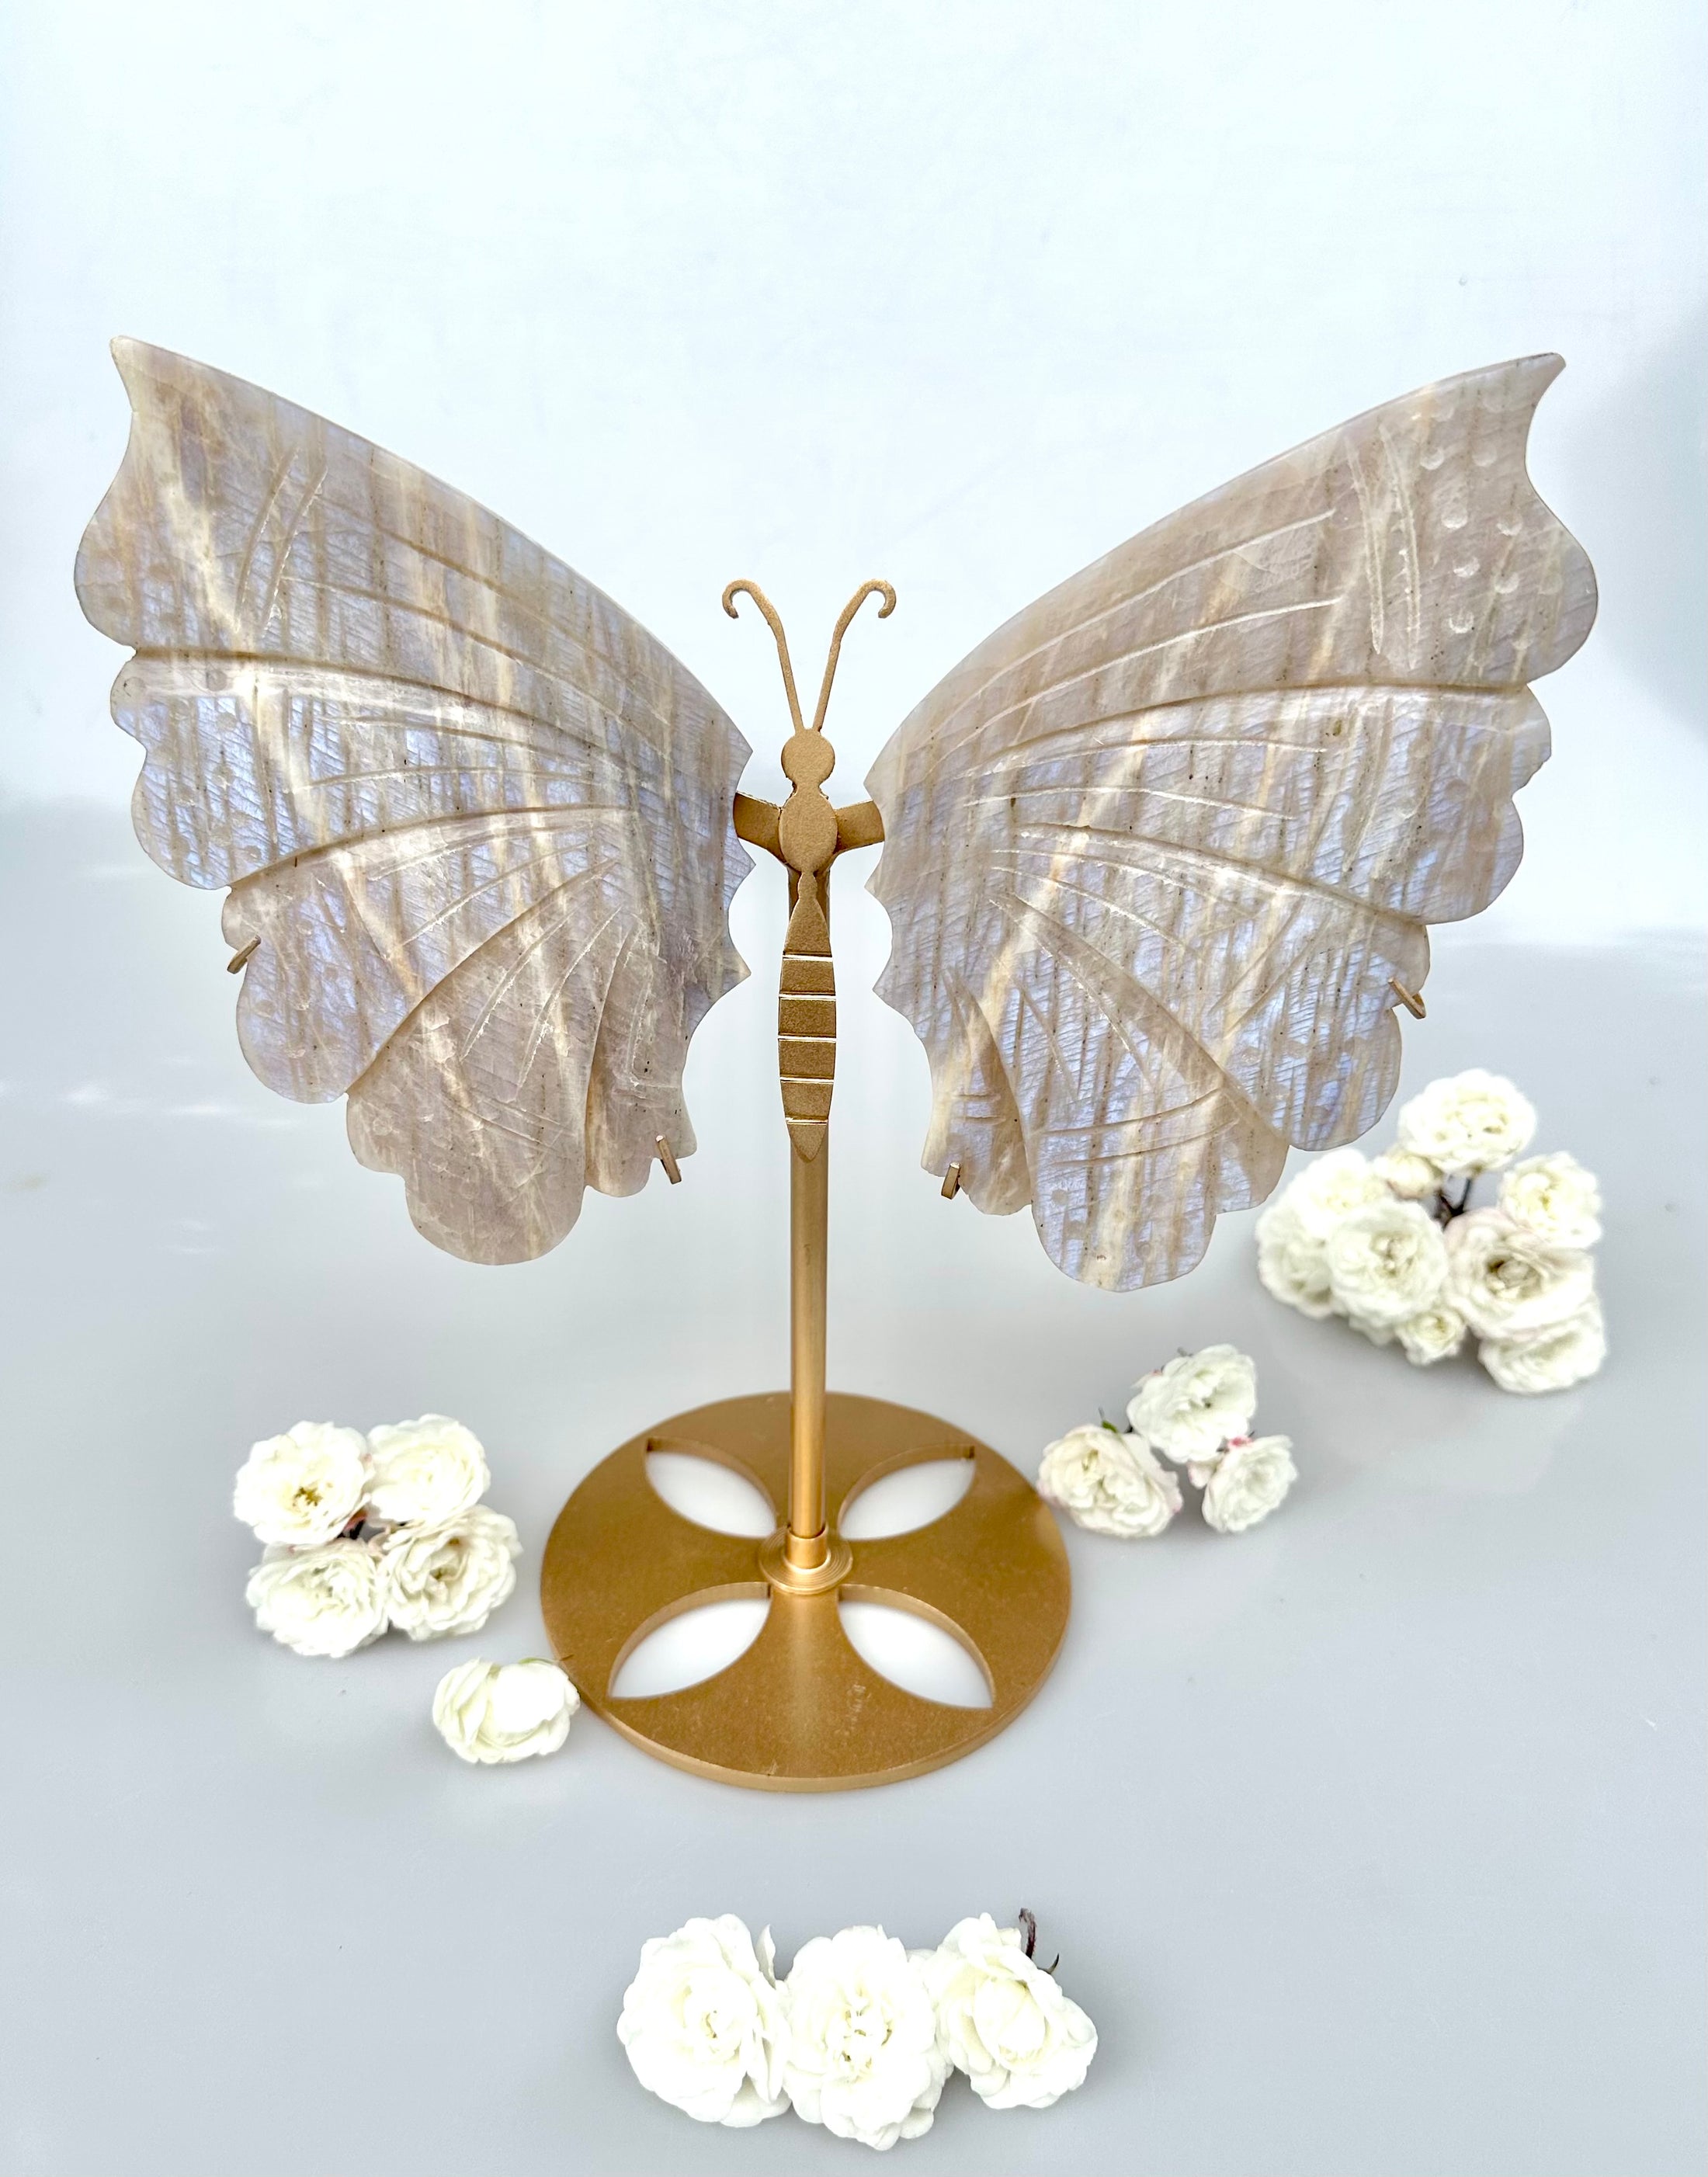 9.8" Tall-Full Flash Moonstone Butterfly Wings Carving On Stand